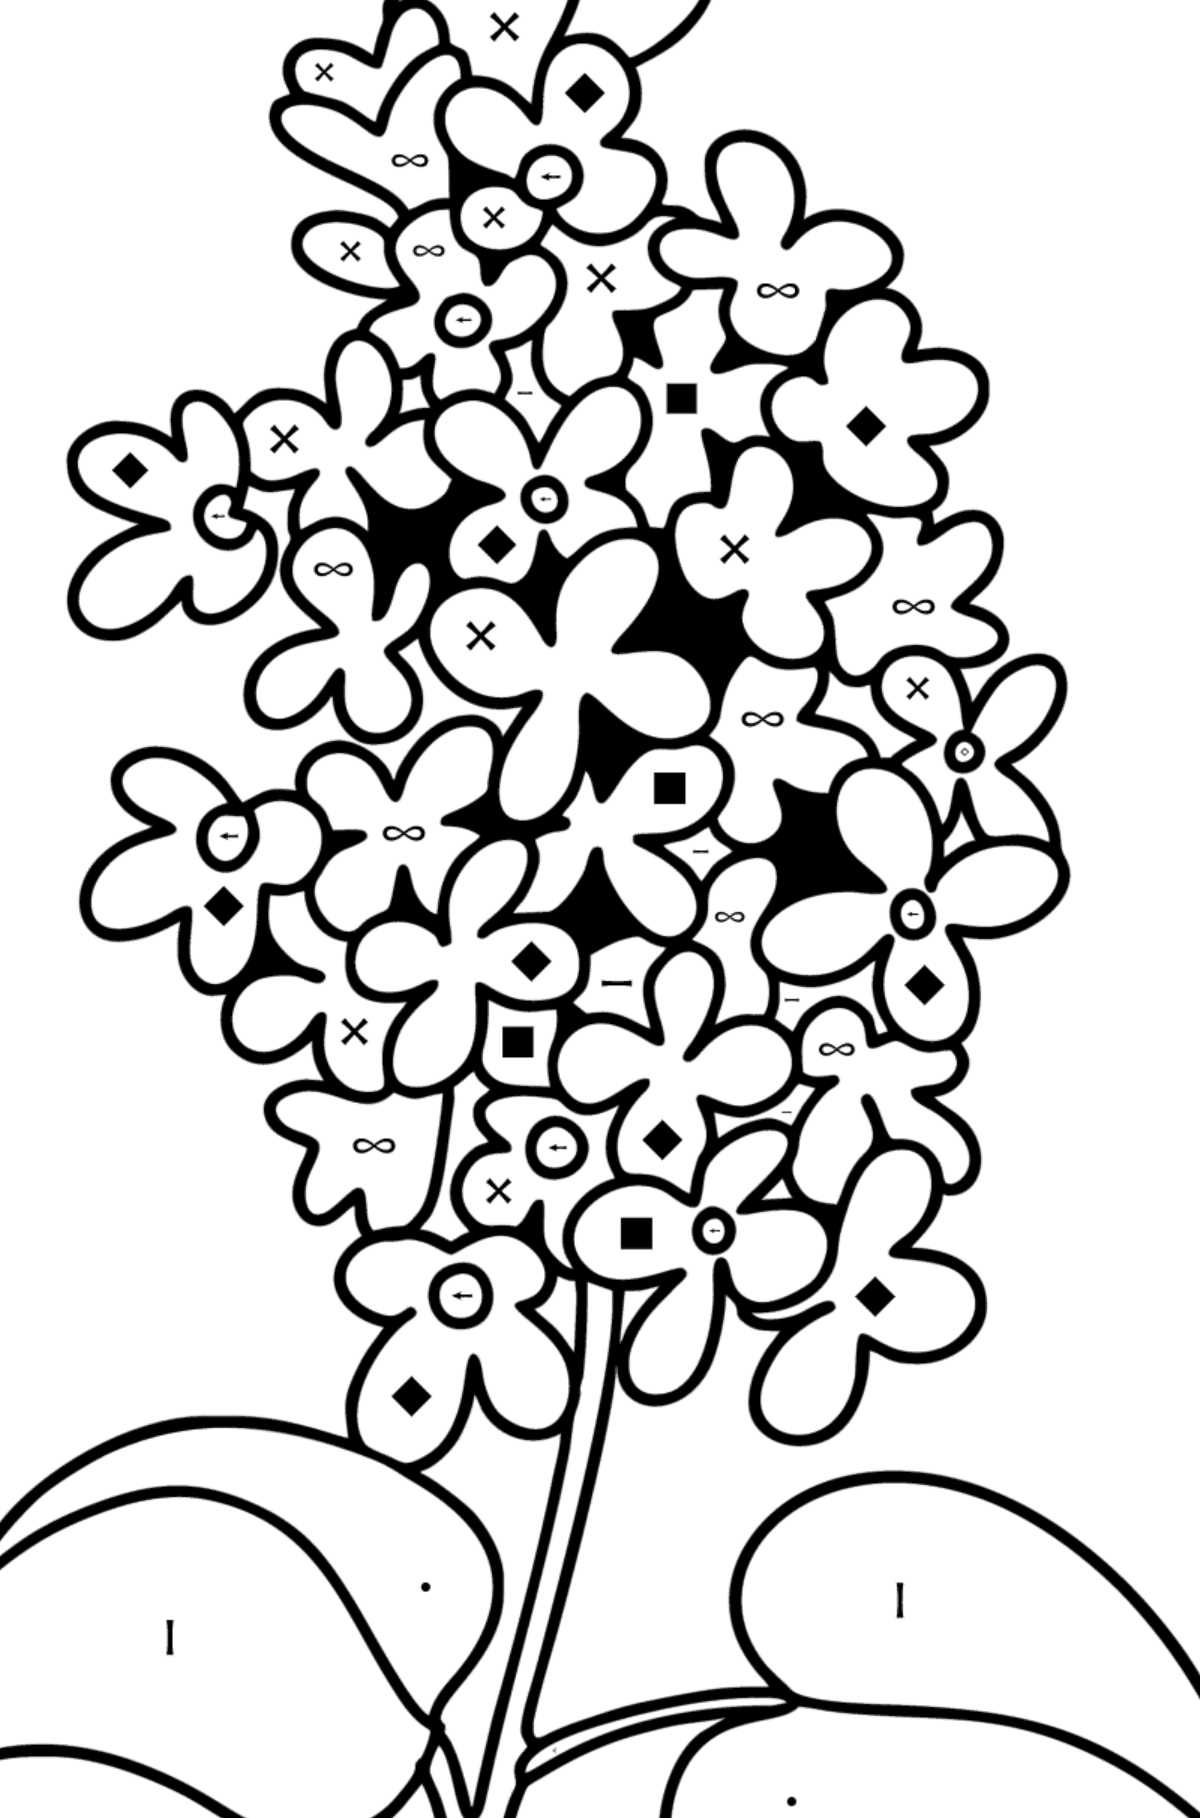 Lilac sprig coloring page - Coloring by Symbols for Kids